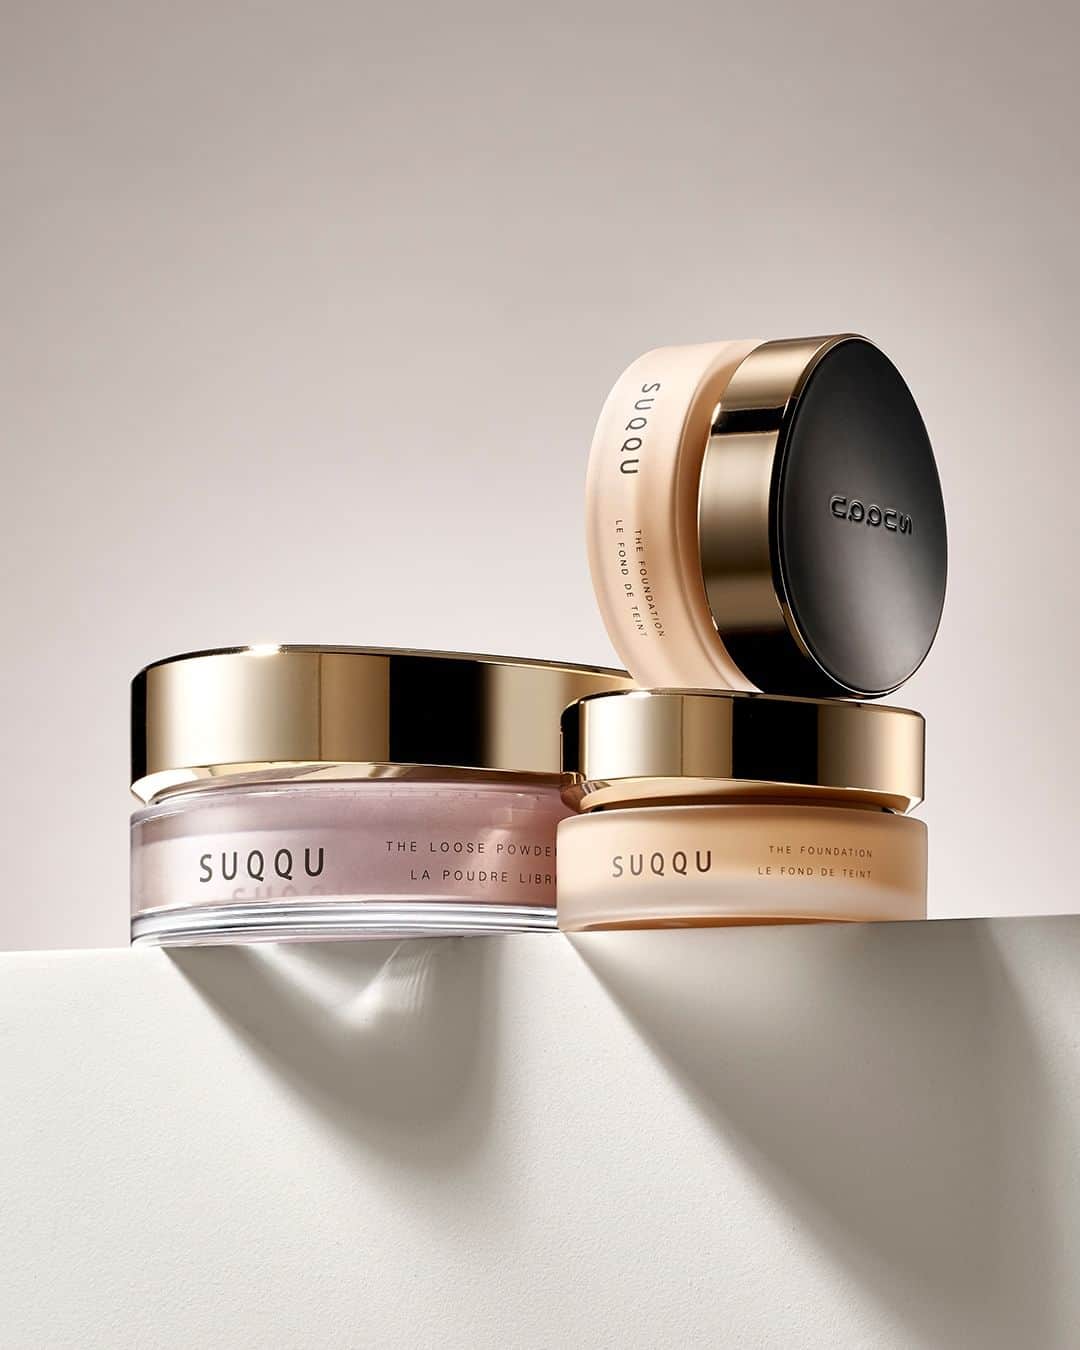 SUQQU公式Instgramアカウントのインスタグラム：「The most luxurious base makeup items in SUQQU's history. For the foundation that is achieved comfortably through a mesmerizing and rich glow, use the feathery finishing powder. It beautifully blends with foundation and sebum as time passes to give a polished look.  THE FOUNDATION THE LOOSE POWDER  SUQQU史上最高にラグジュアリーなベースメイクアイテム。 うっとりとなめらかで、端正な満ちる艶のファンデーションには、透き通る薄衣のようなルースパウダーを。 素肌やファンデーションの美しさを活かしつつ、毛穴や小ジワはソフトフォーカスし、つるんと輝く肌へ。時間の経過とともにファンデーションや皮脂と美しくなじみ、端正に整えます。  ザ ファンデーション ザ ルース パウダー  #SUQQU #スック #jbeauty #cosmetics #SUQQU20th #SUQQUbasemakeup #ザファンデーション #ザルースパウダー #basemake #foundation #powder #新商品 #newproducts」